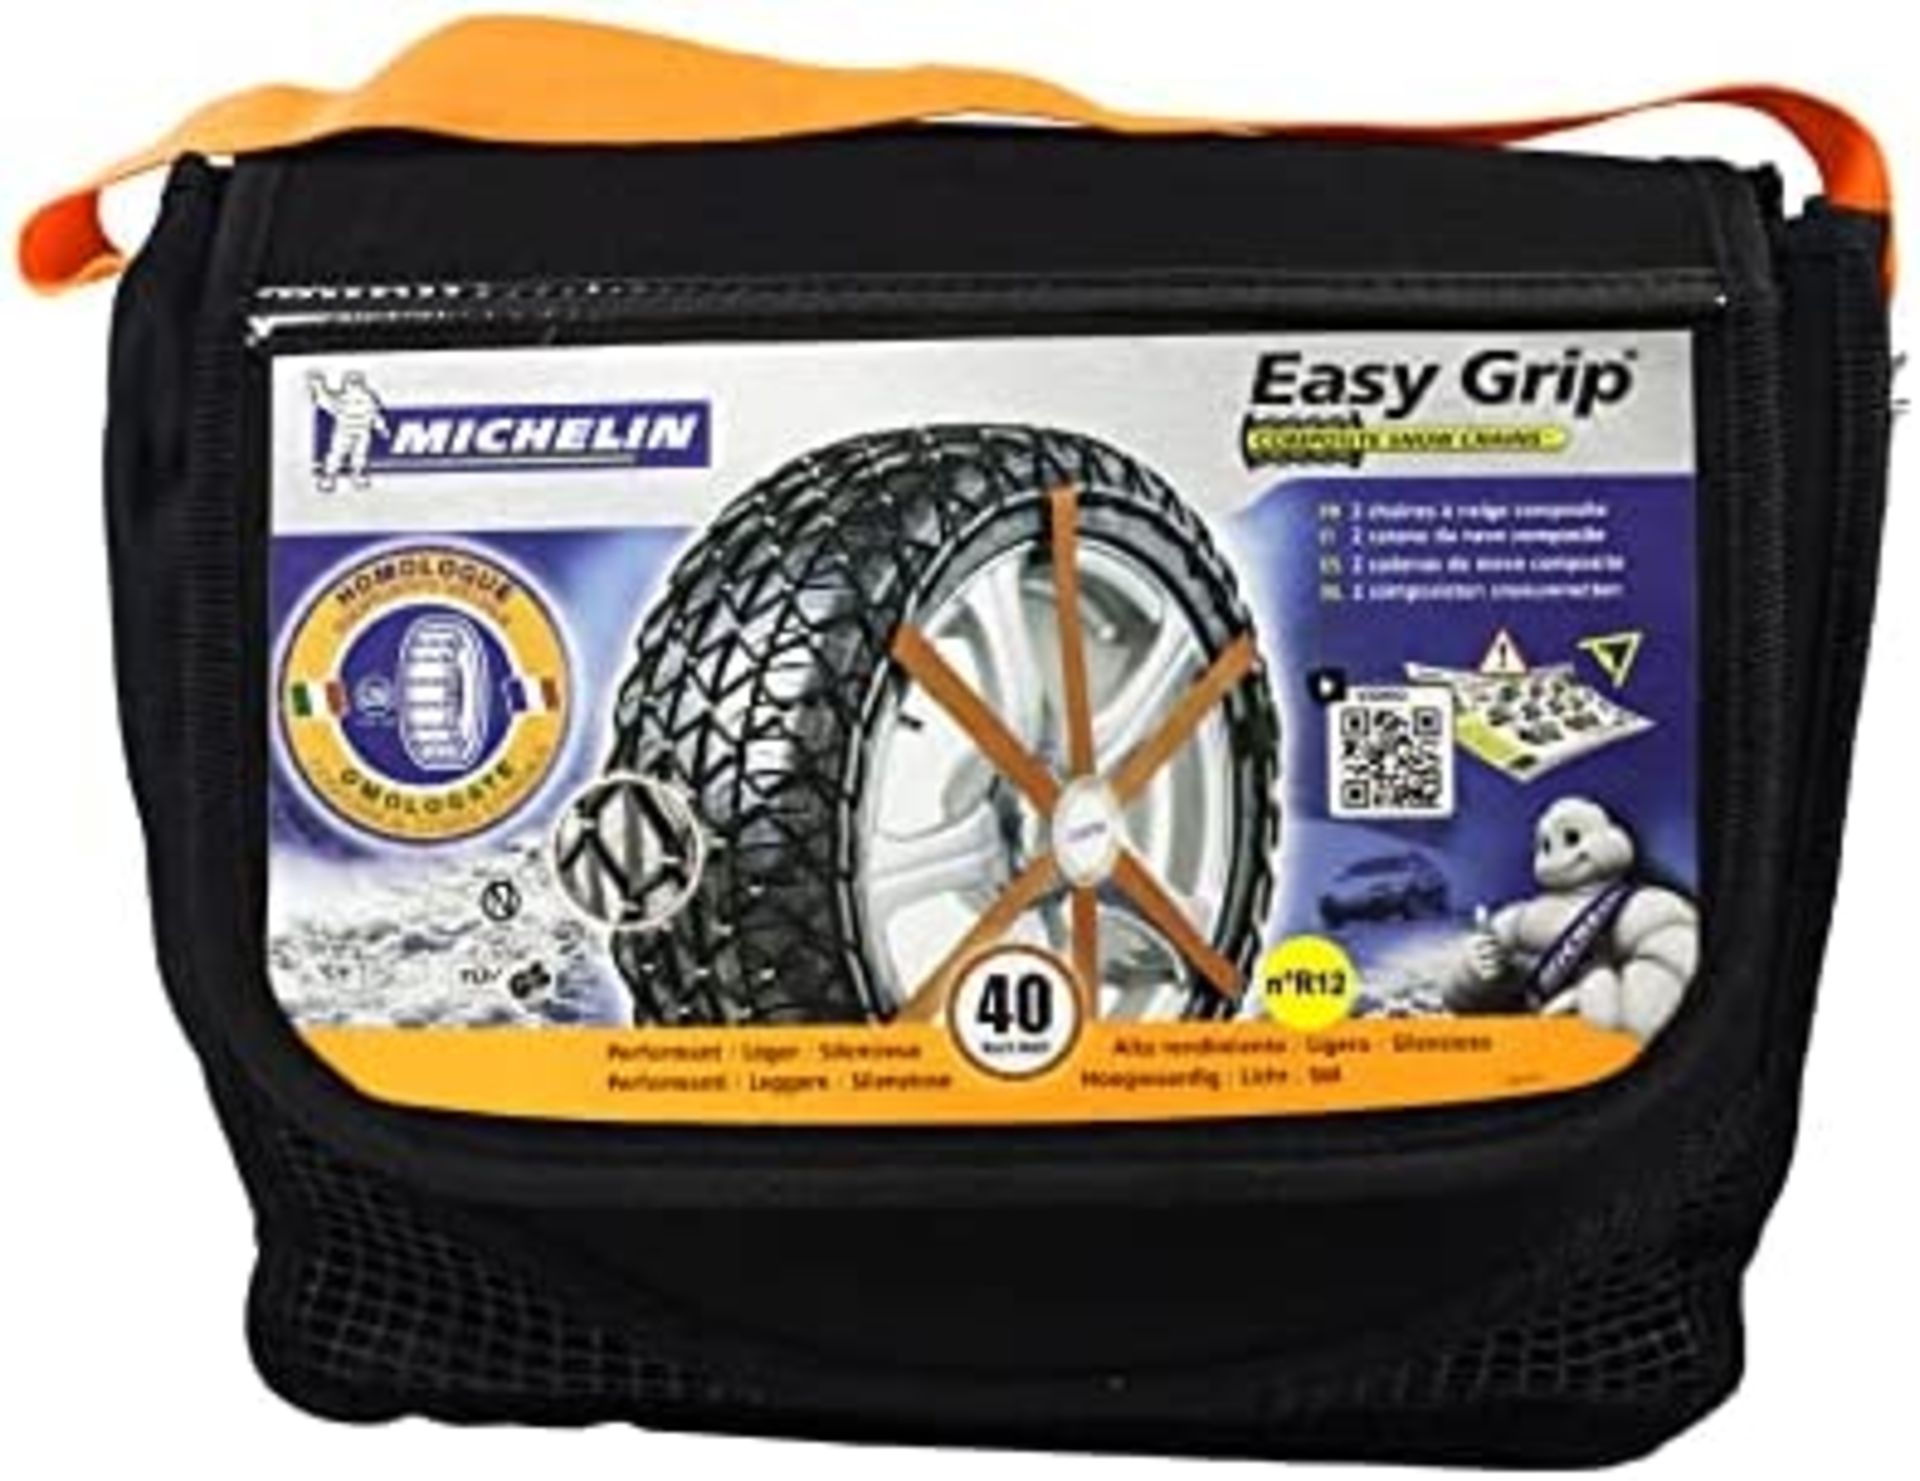 5 X NEW PACKAGED SETS OF Michelin Snow Sock Easy Grip R12. RRP £85.95 EACH. The Michelin Easy Grip